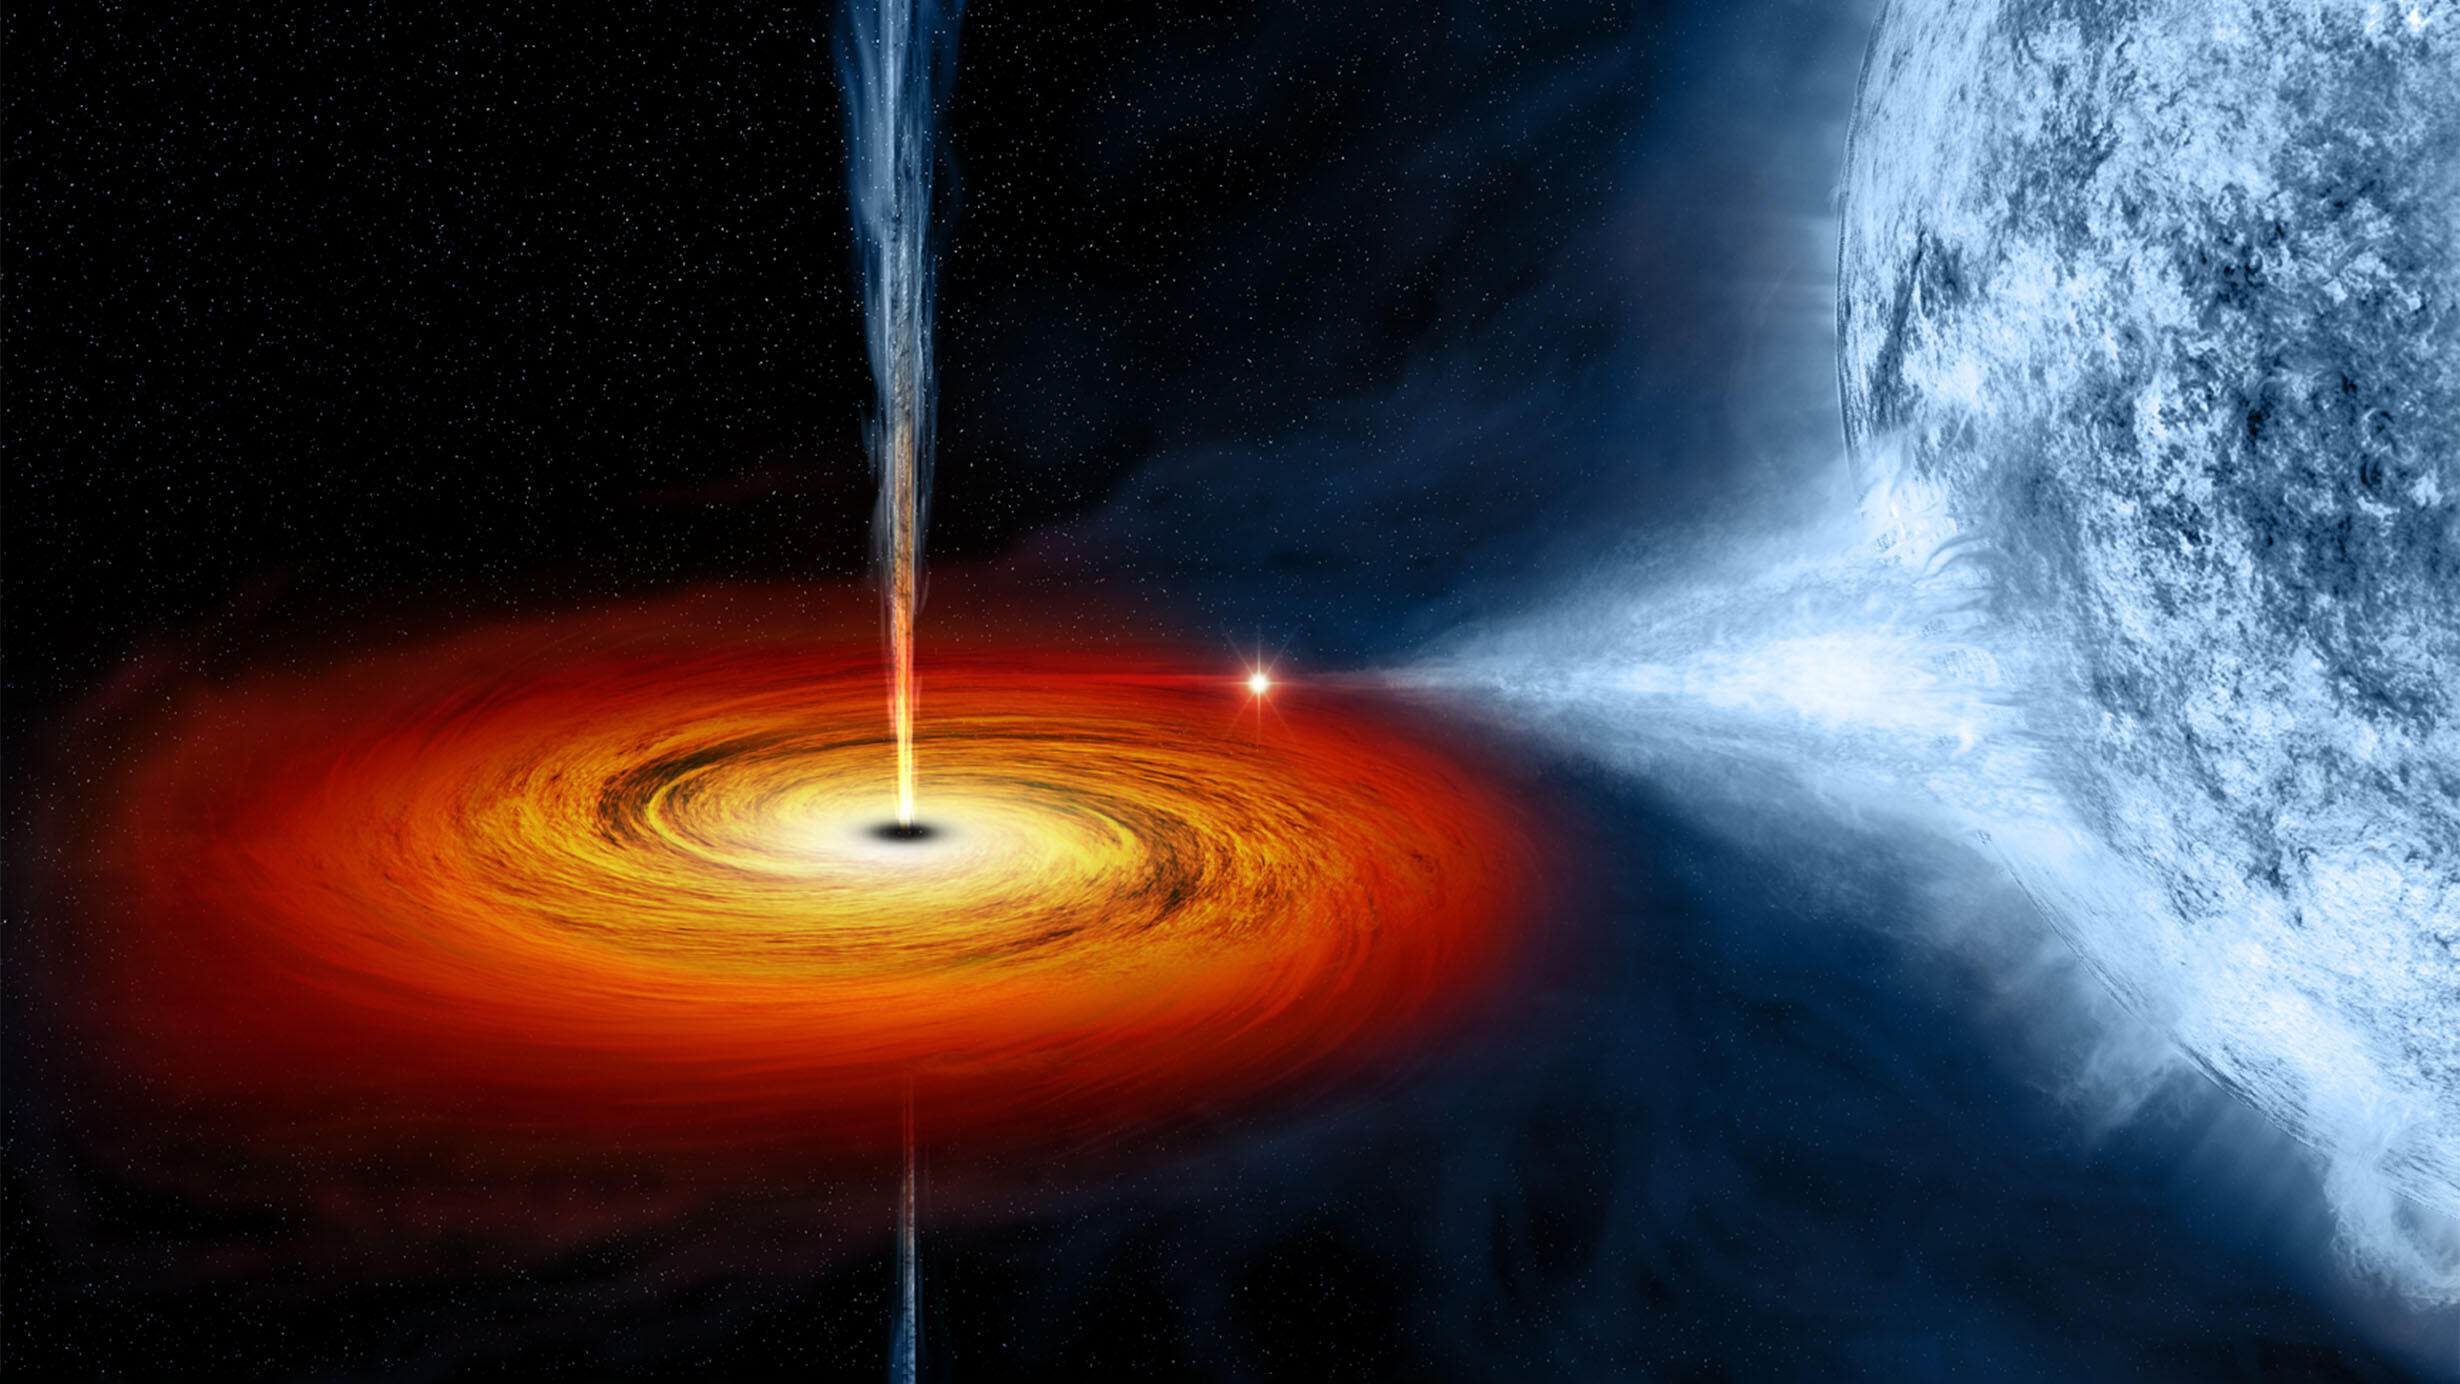 Illustration of a black hole, pictured as a brightly colored spiral disk formation pulling material from a light colored star right next to it. 